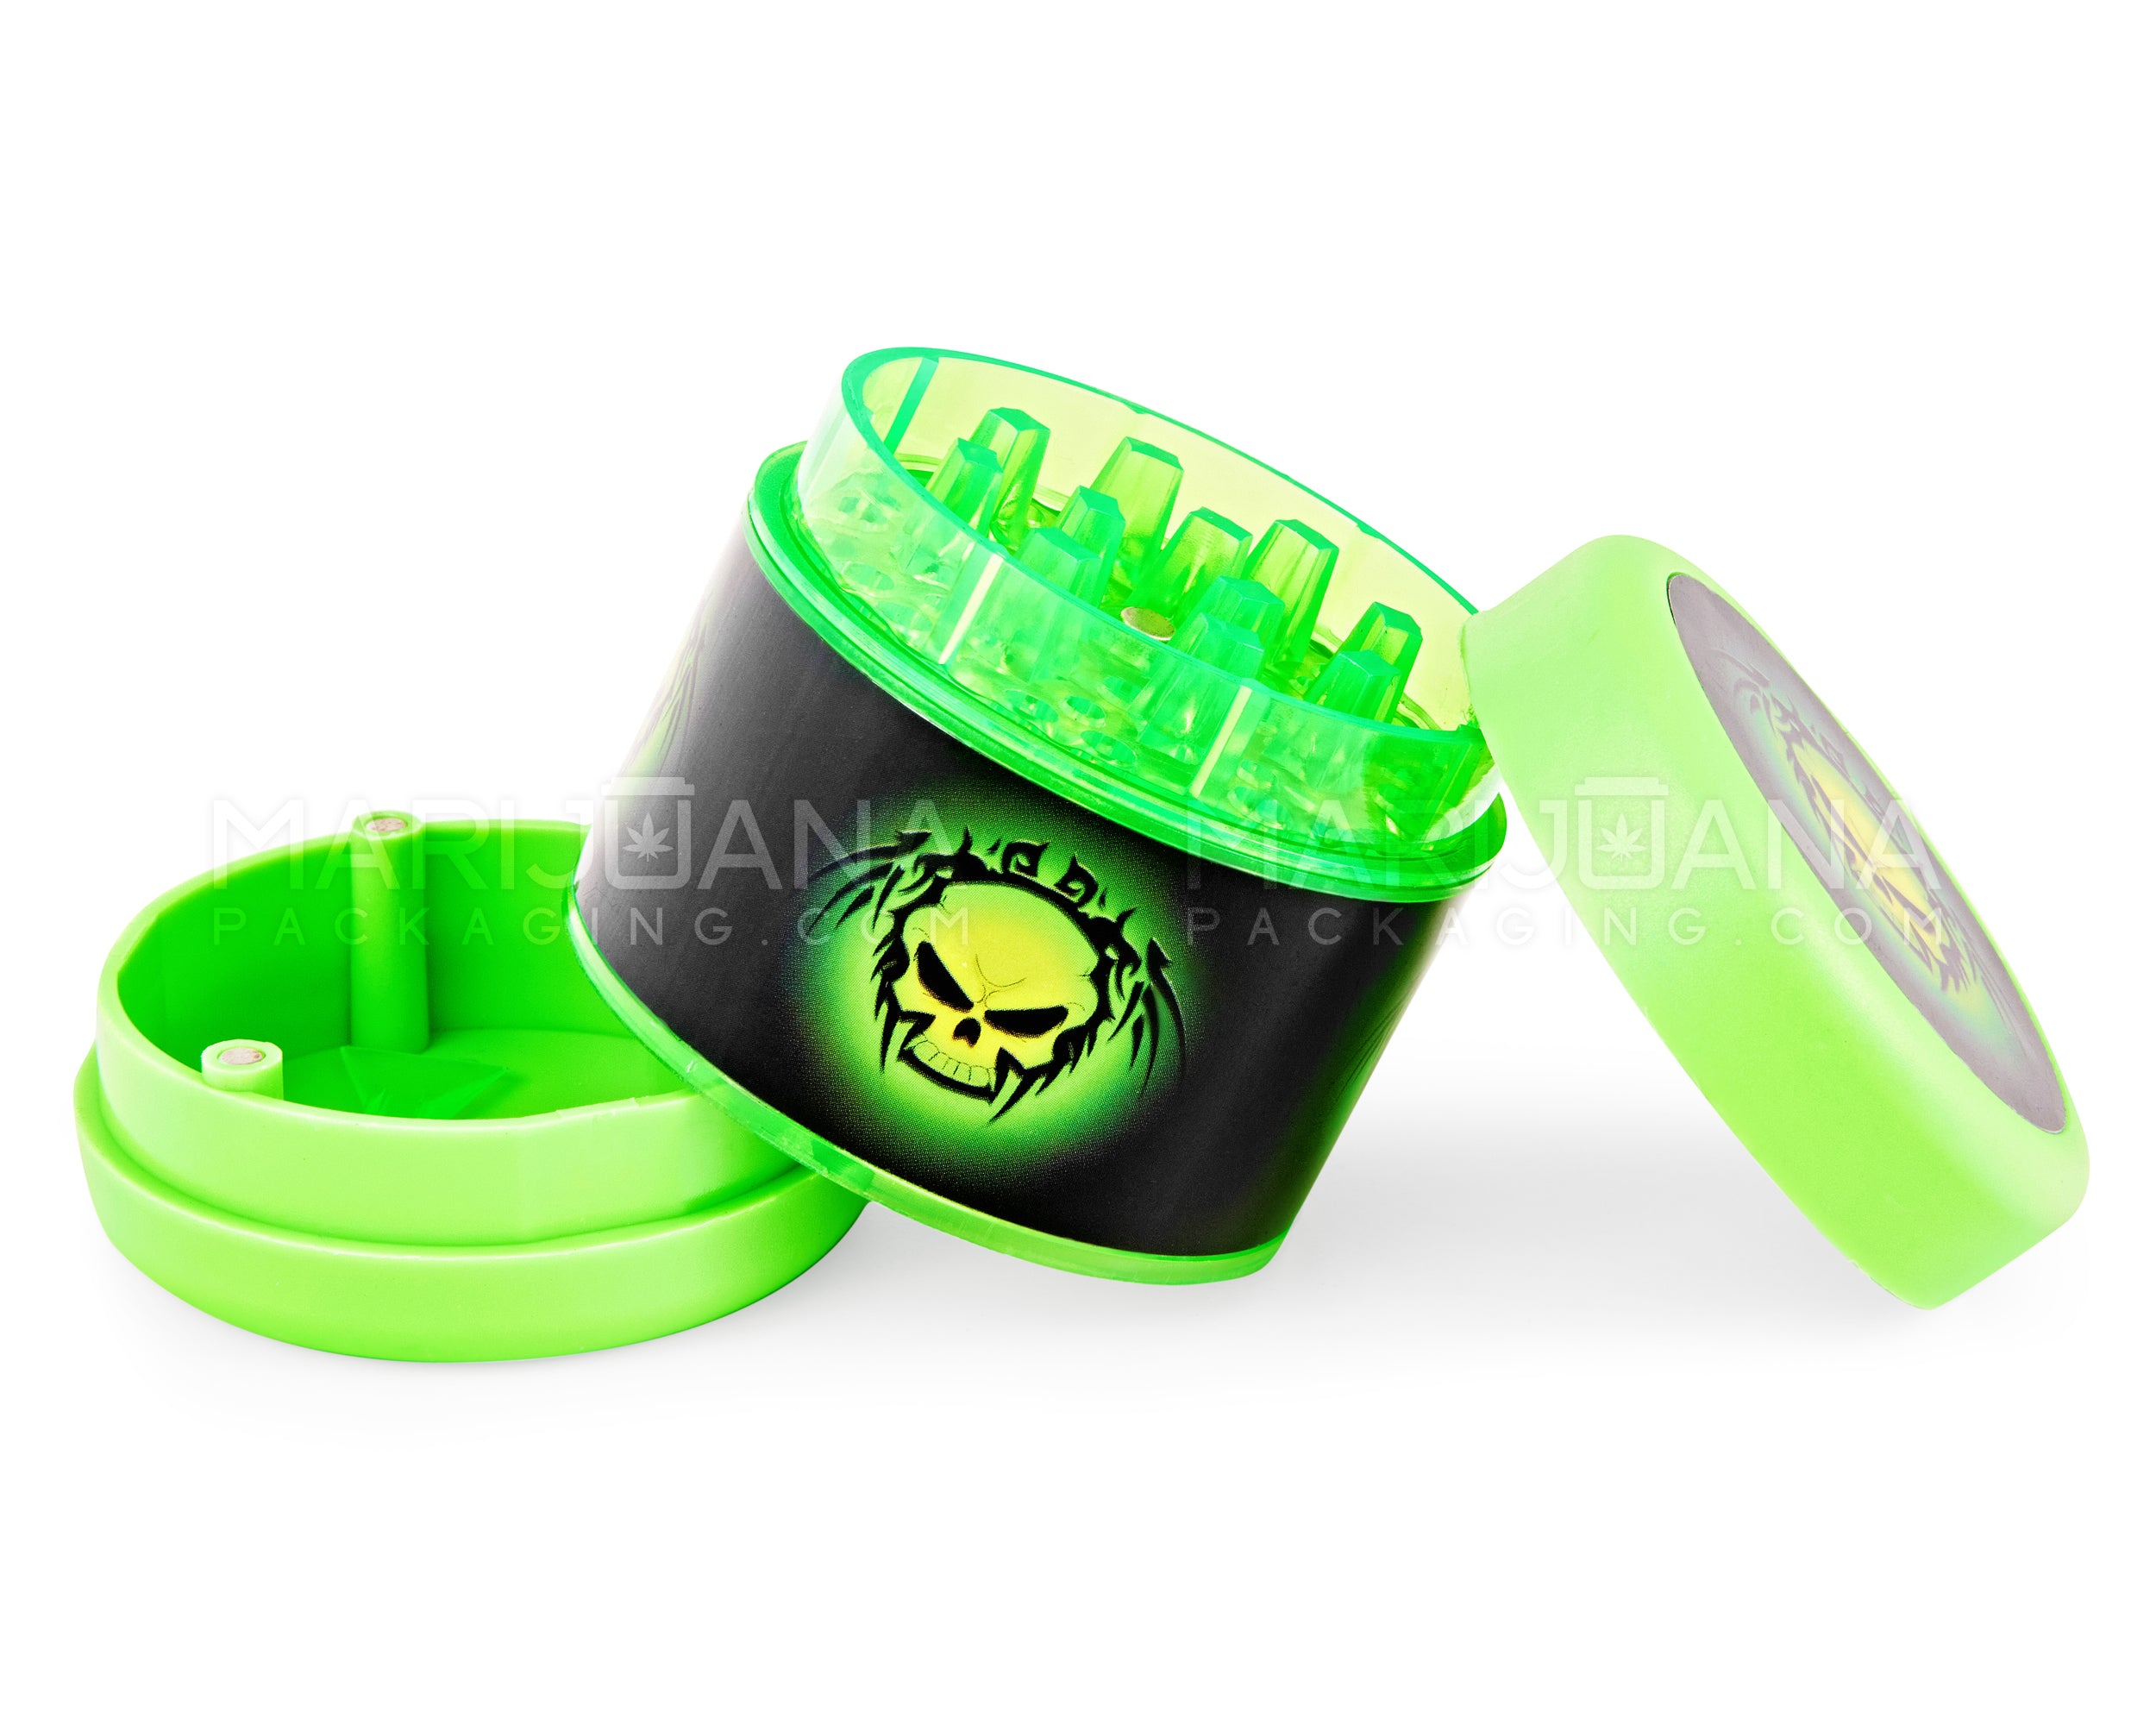 Skull Decal Magnetic Plastic Grinder w/ Screen Catcher | 4 Piece - 54mm - Green - 3